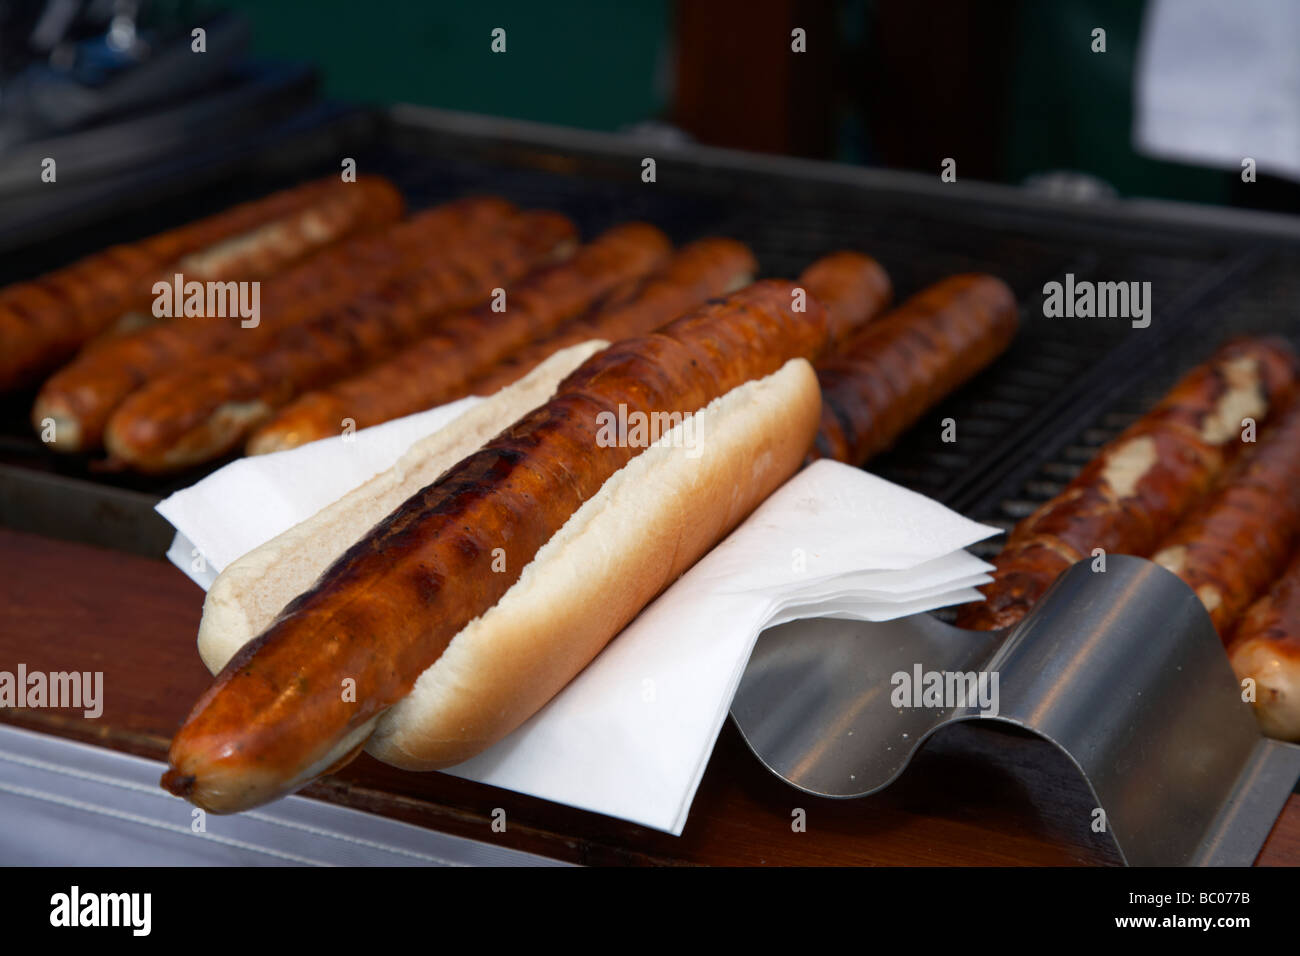 bratwurst in bread roll bap on napkin with german sausages on grill on sale at an outdoor market in the uk Stock Photo